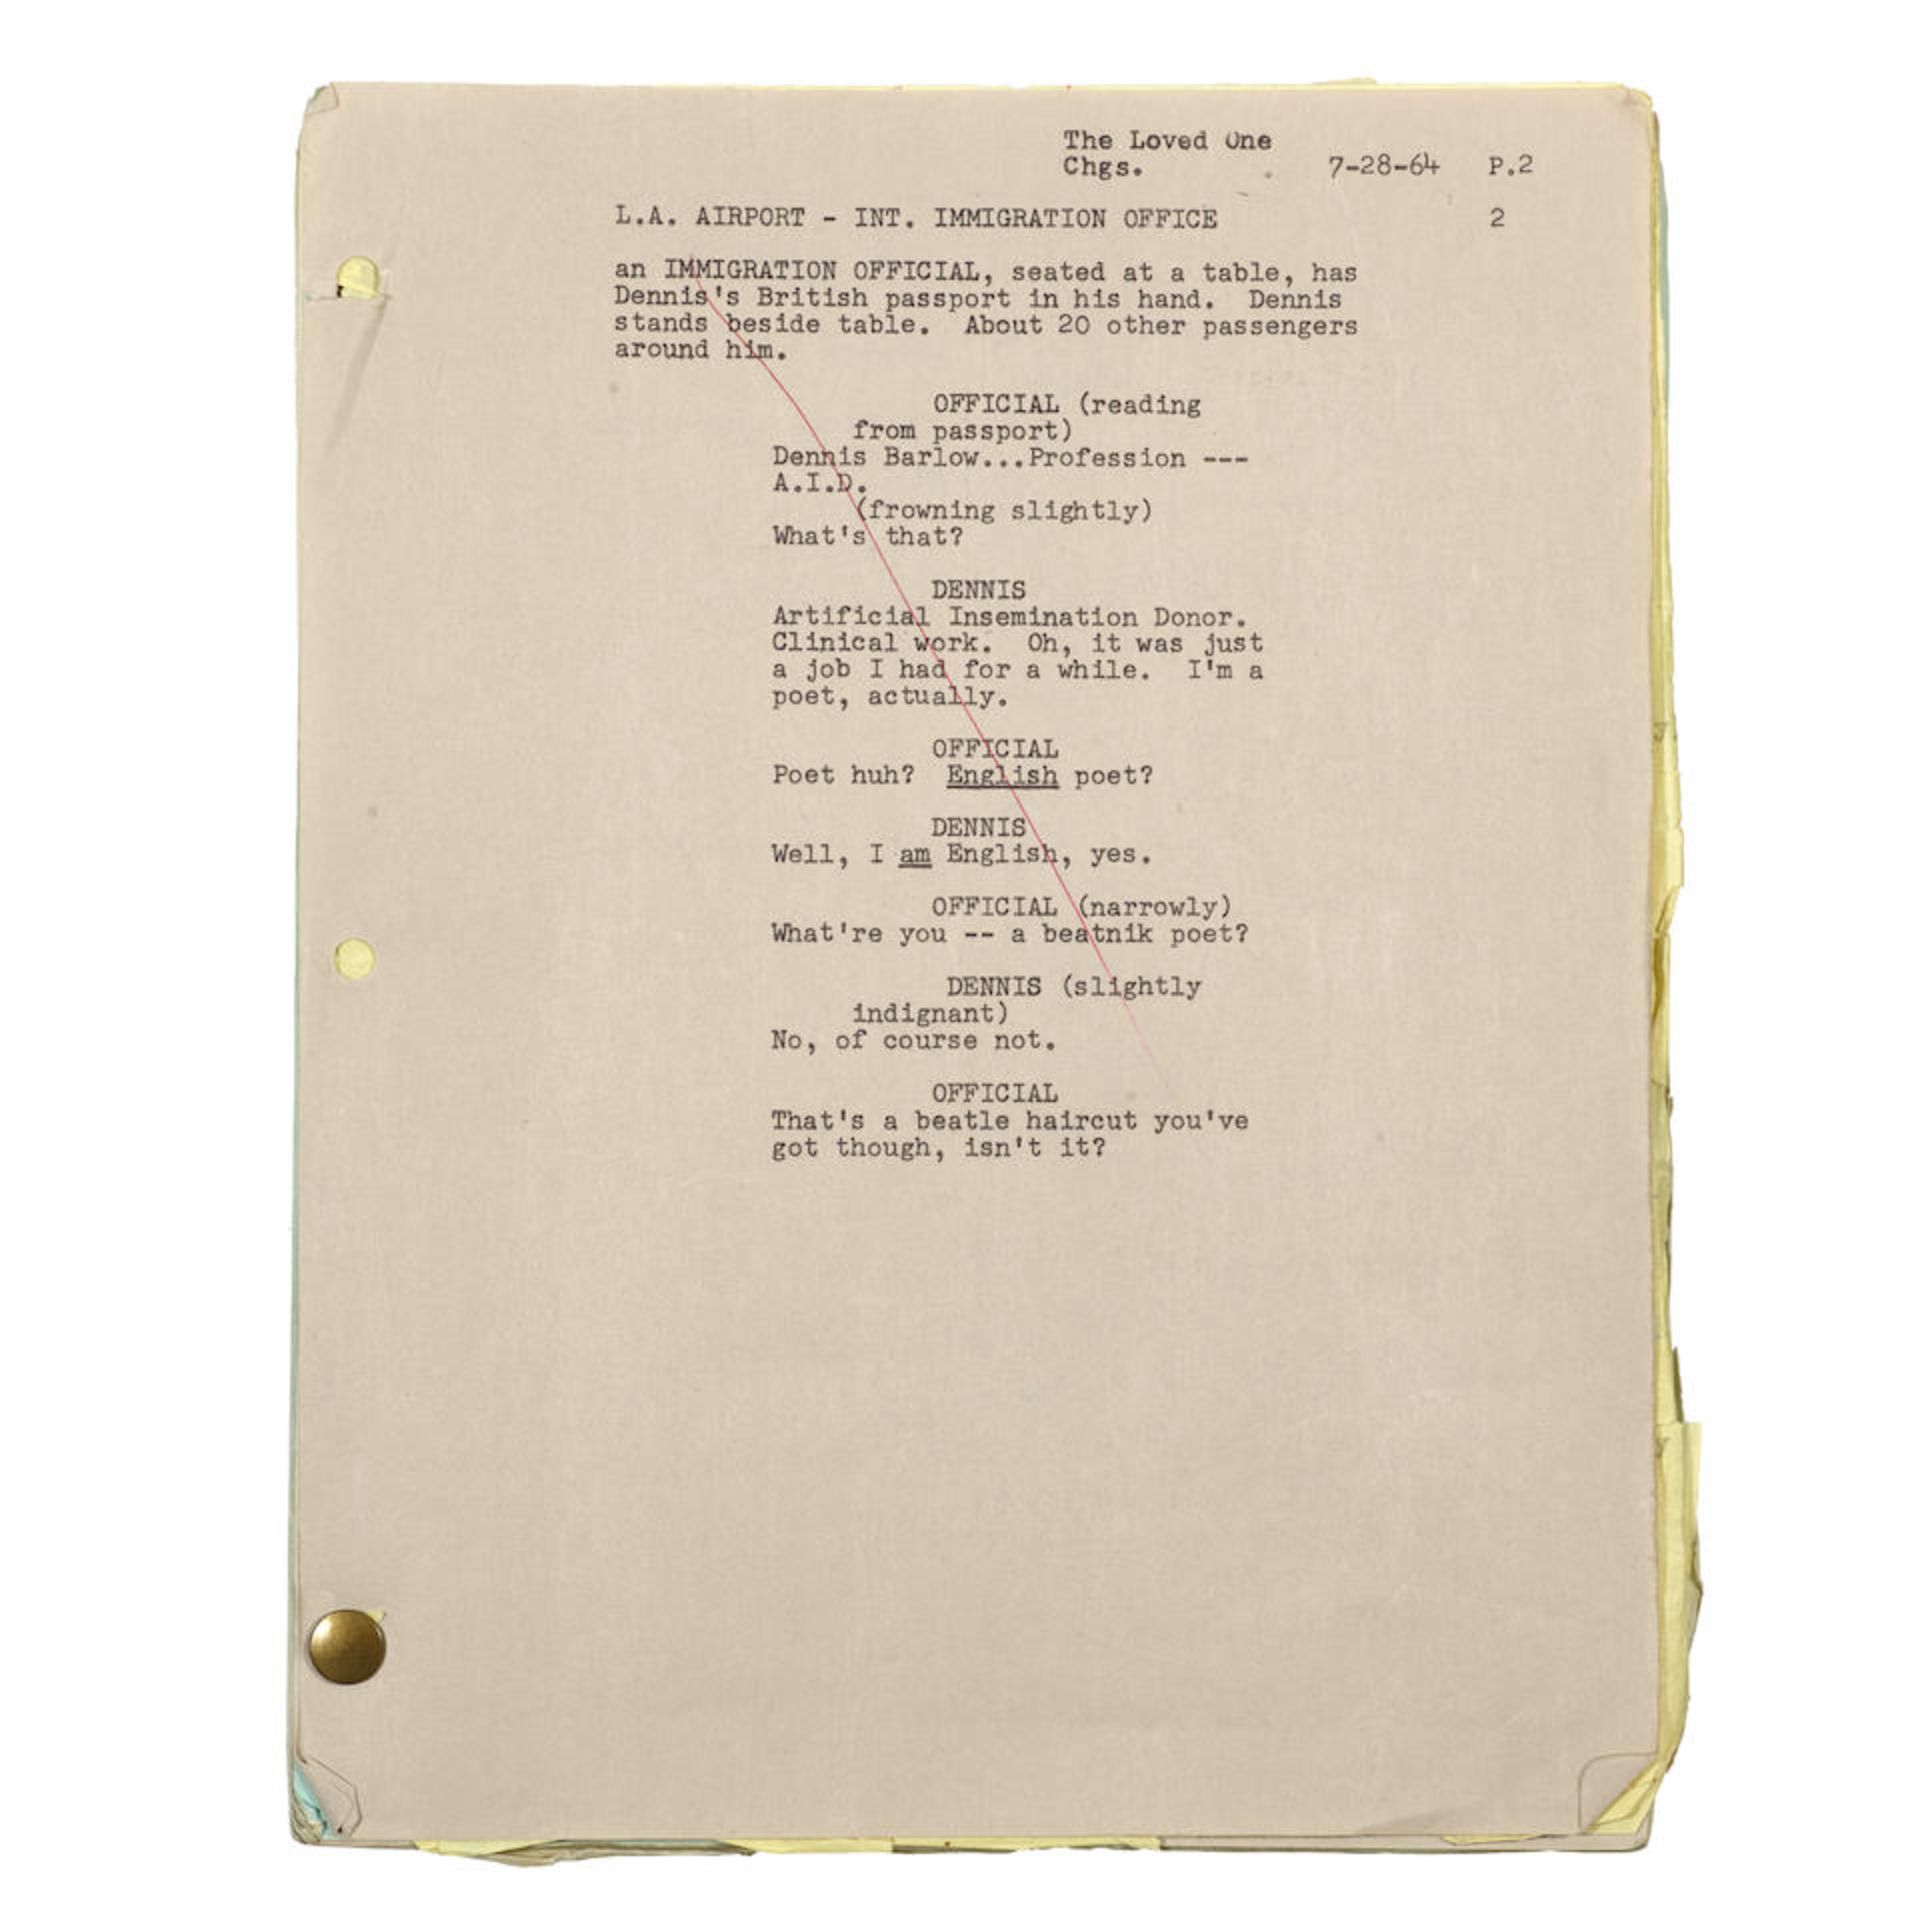 META REBNER'S WORKING SCRIPT OF THE LOVED ONE. Mimeographed Manuscript with Annotations, 'The Lo...